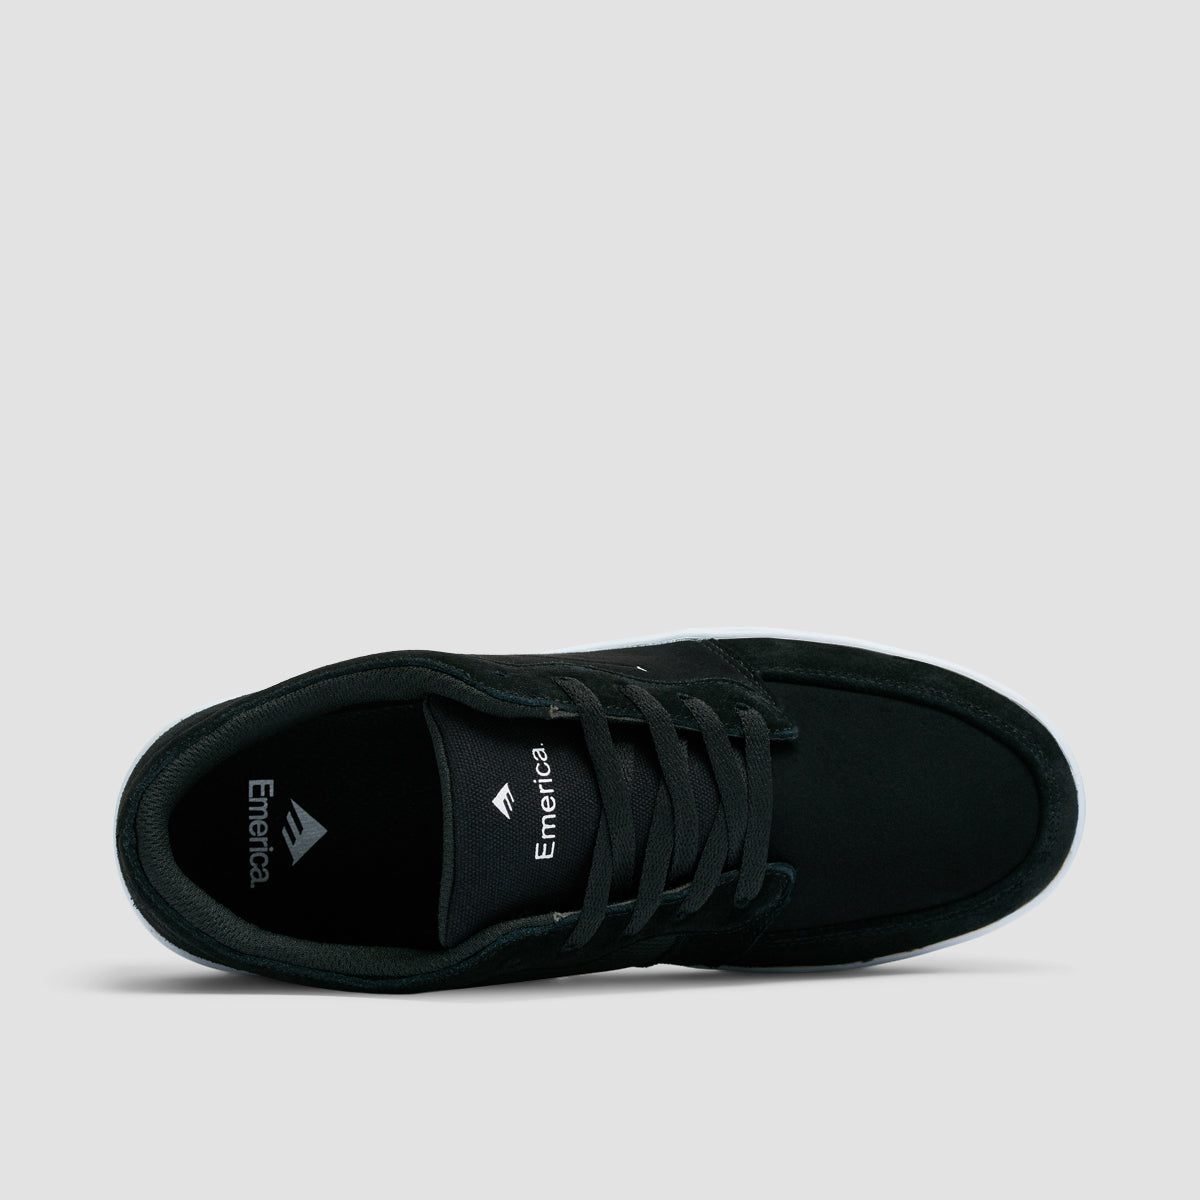 Emerica Quentin Shoes Black